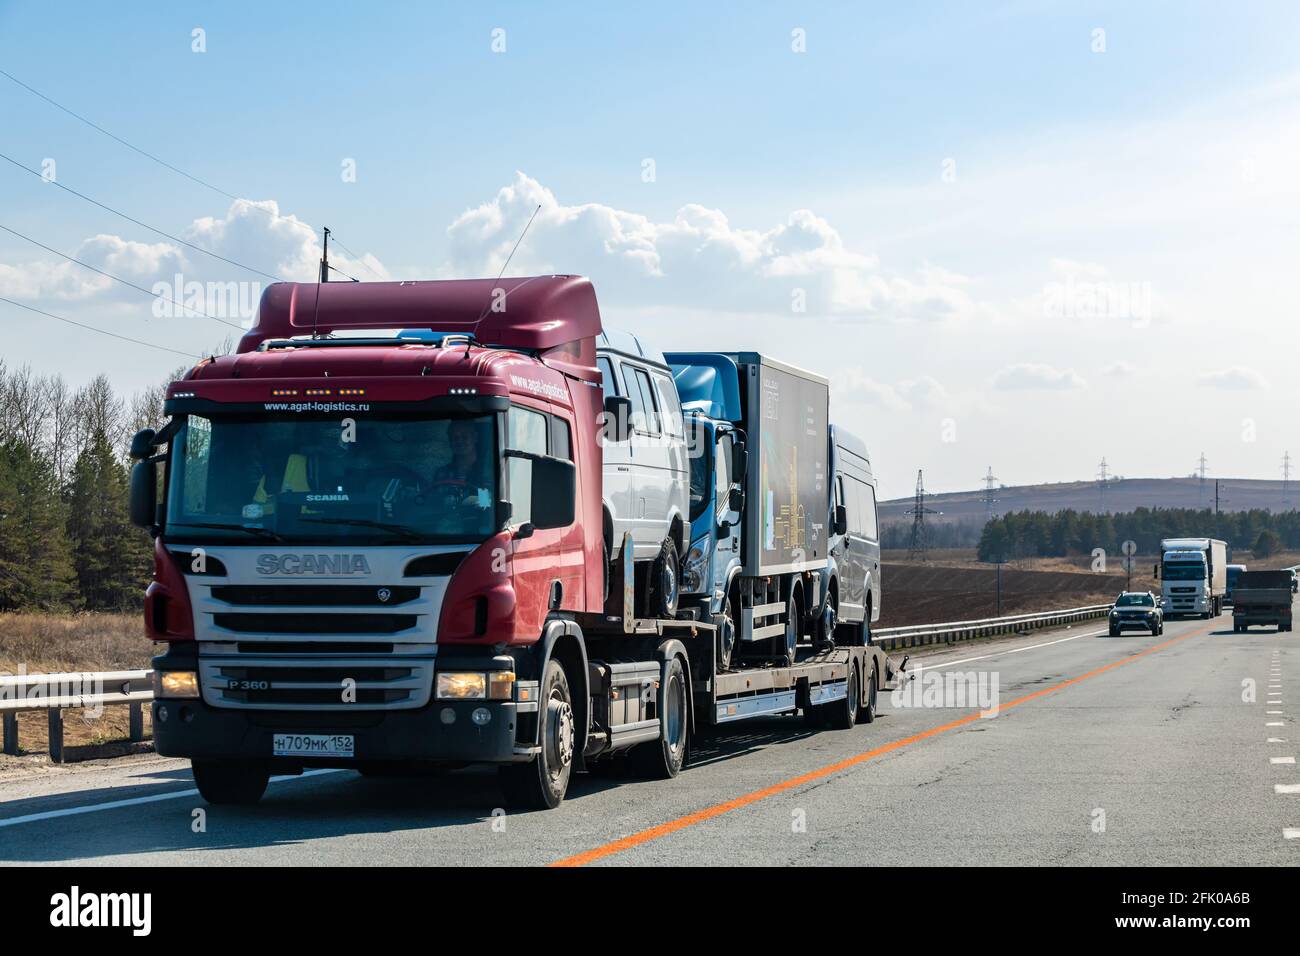 Interstate Highway Ufa - Kazan M7, Russia - Apr 23th 2021. The Scania truck of the AGAT-LOGISTIC.RU company transports medium-sized commercial vehicle Stock Photo